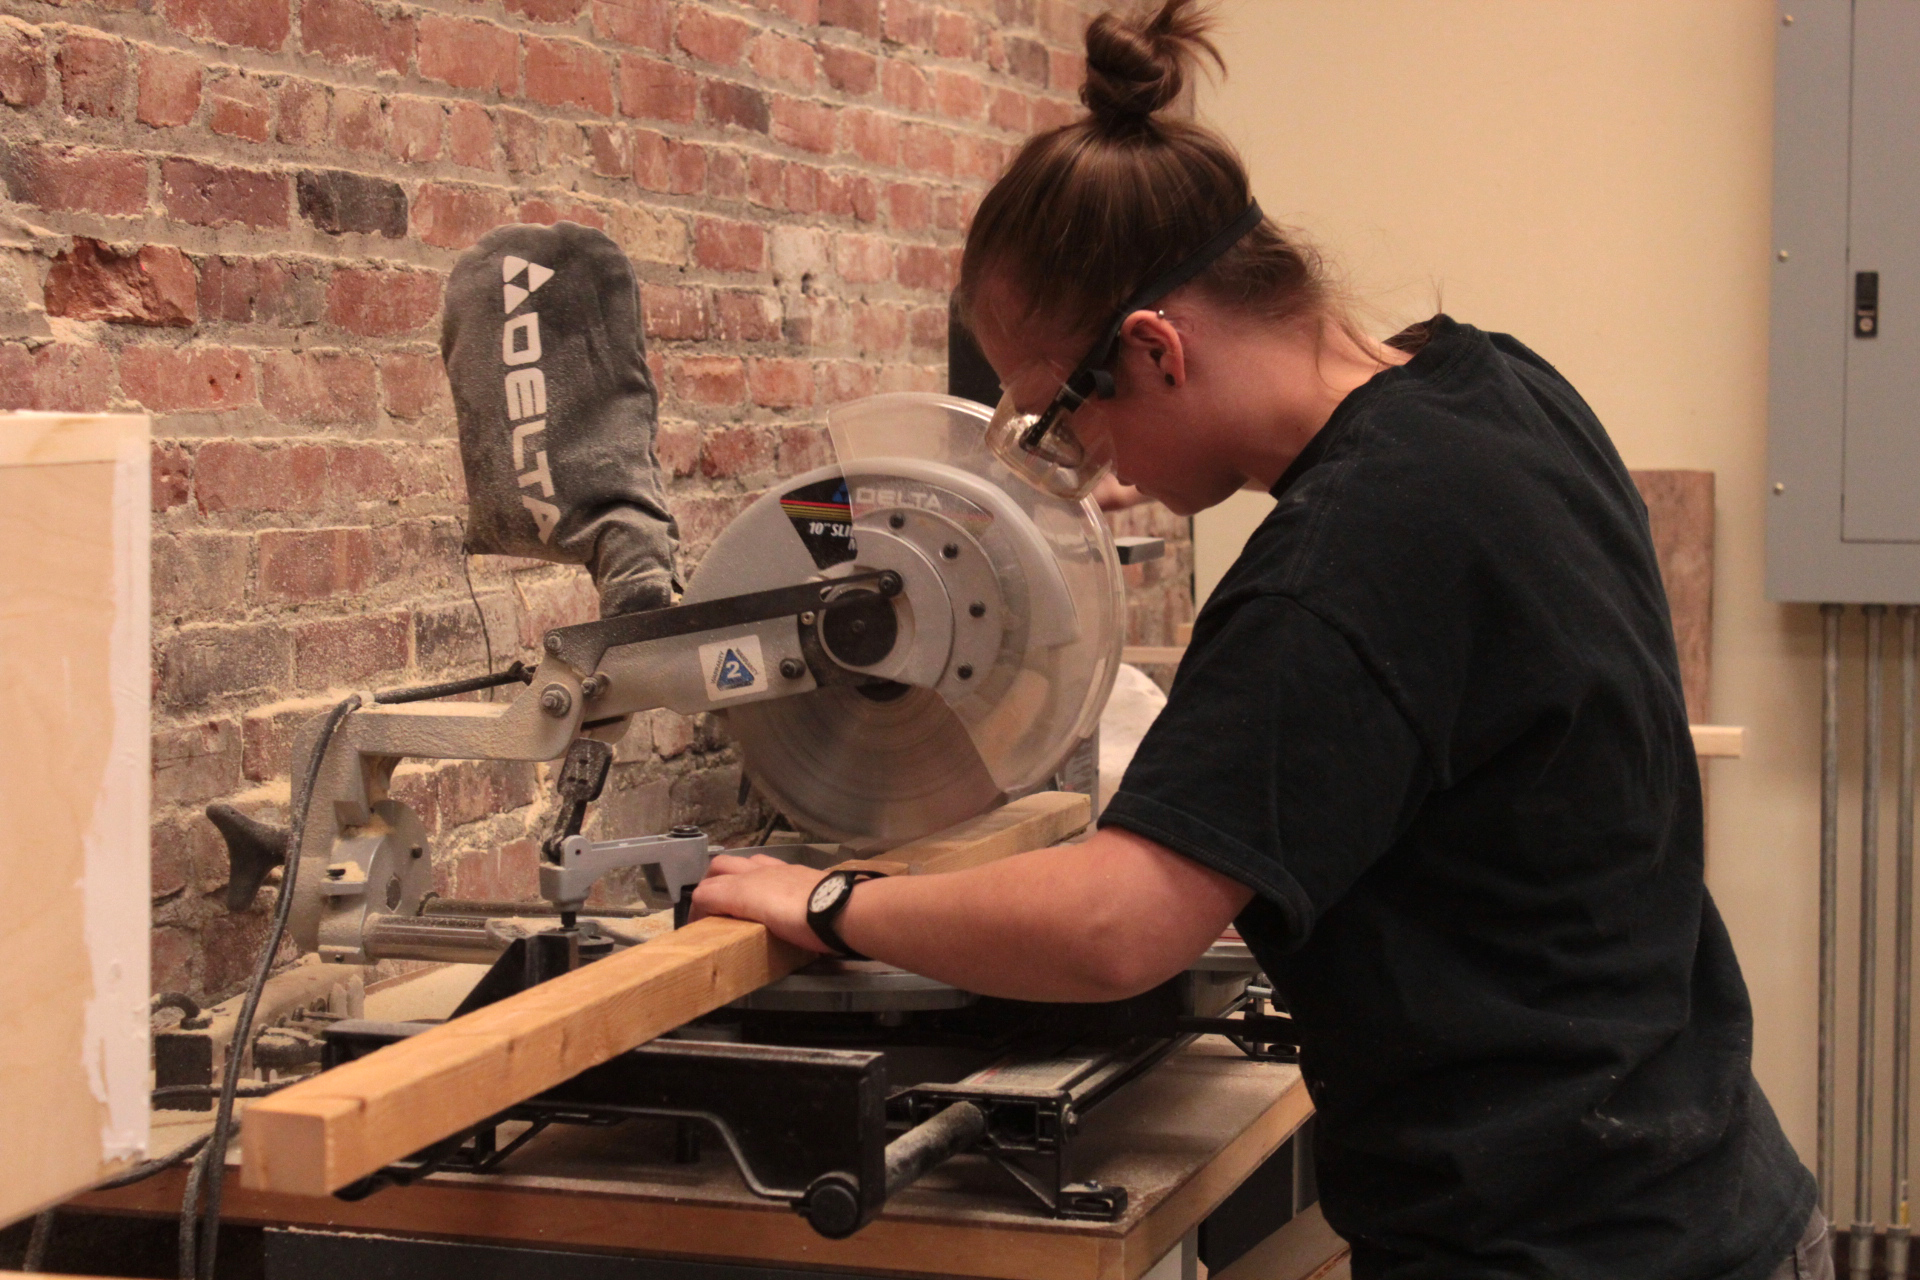 Download Woodworking - The Arts Center of the Capital Region